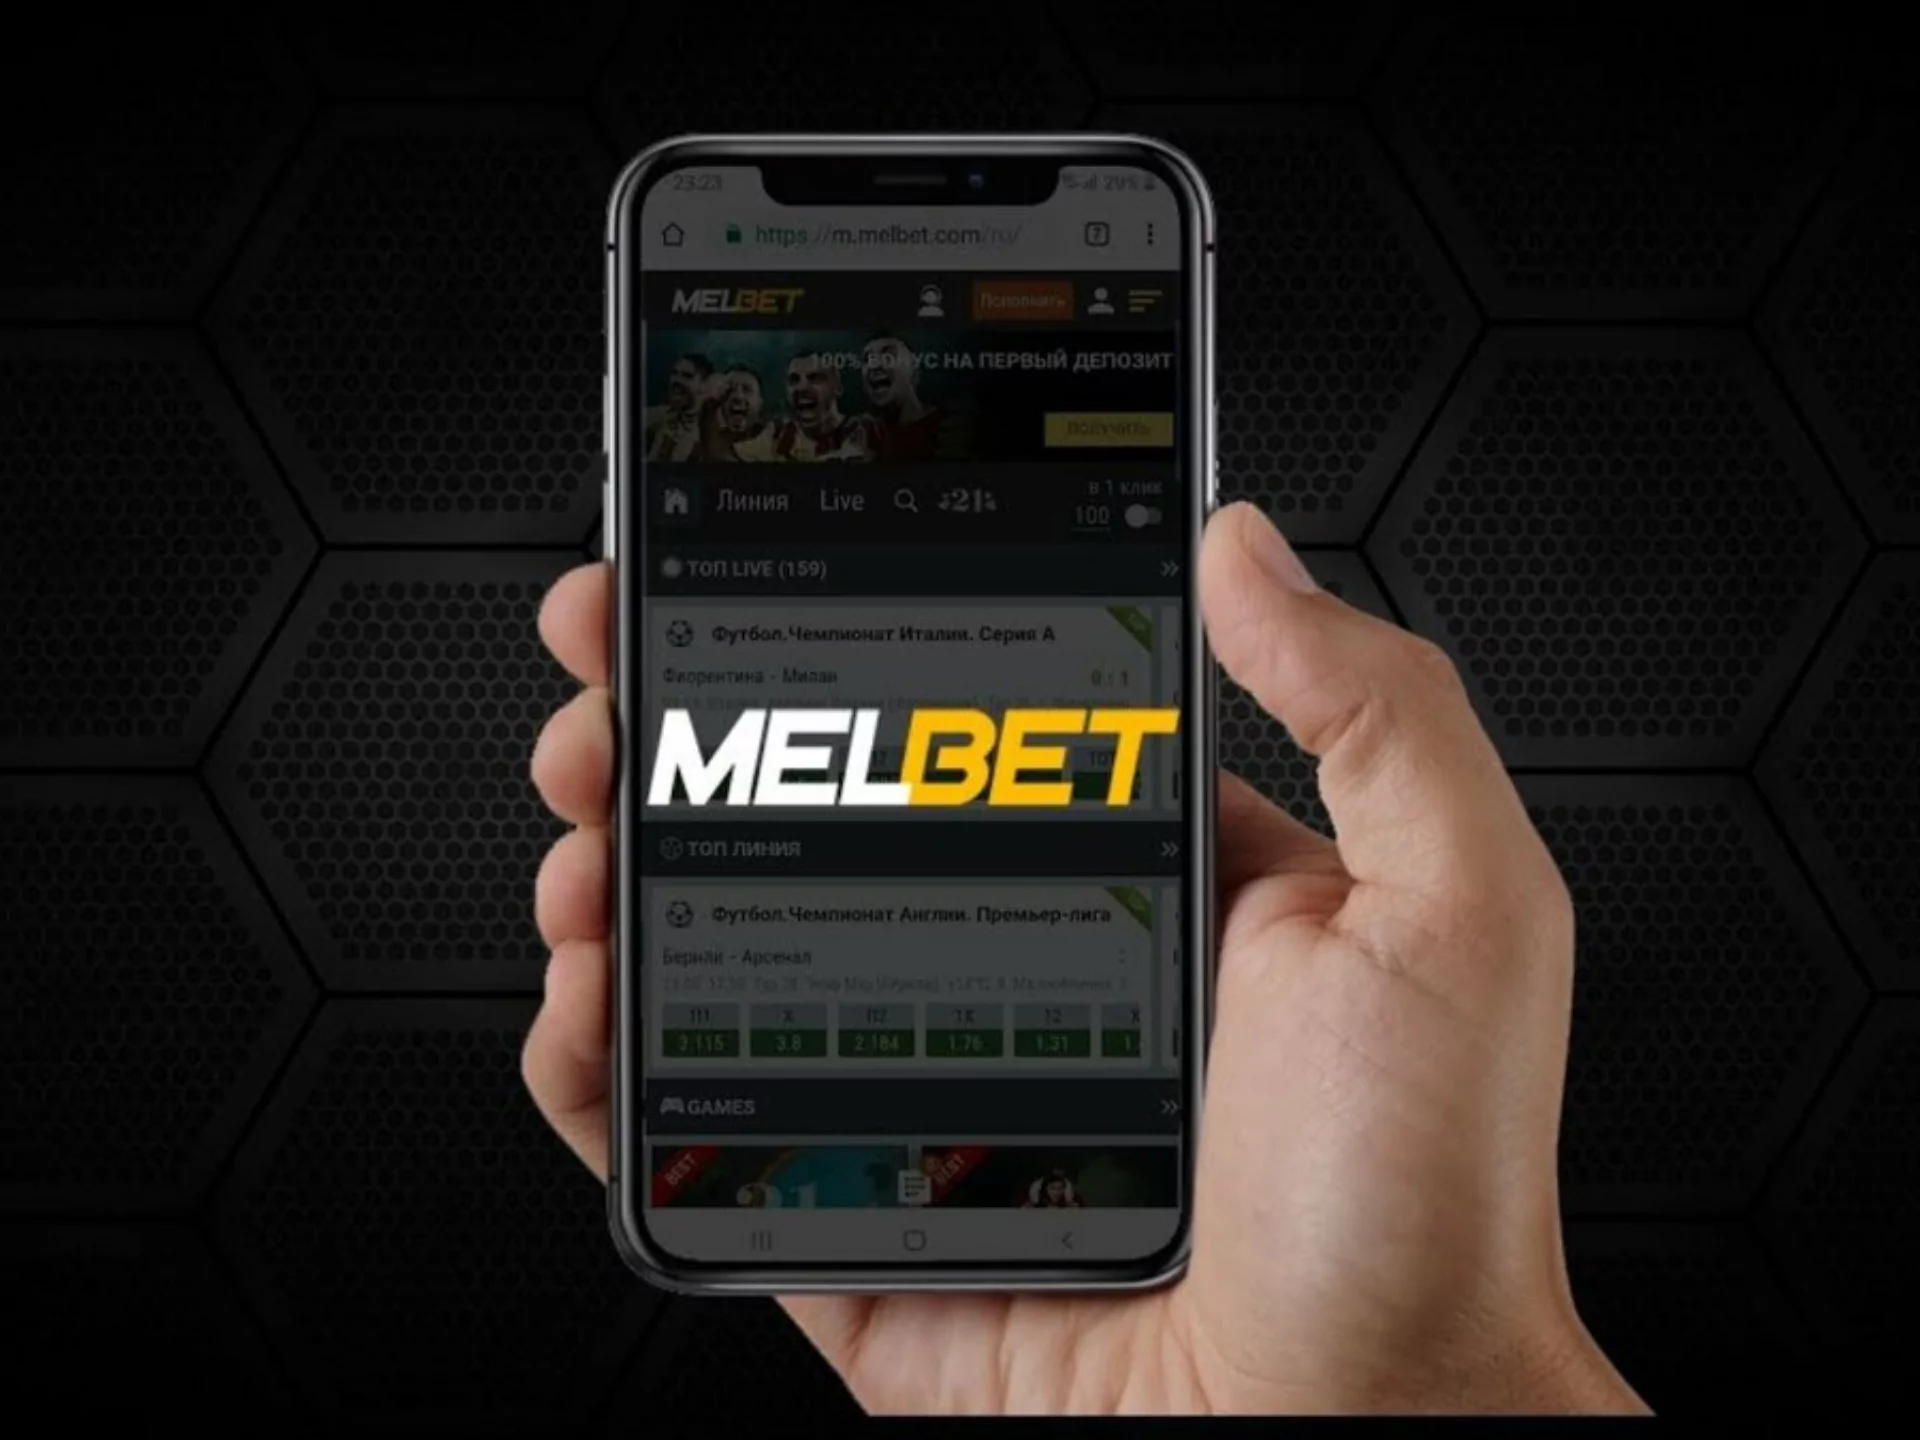 You can download the Melbet app on Android on the official website.